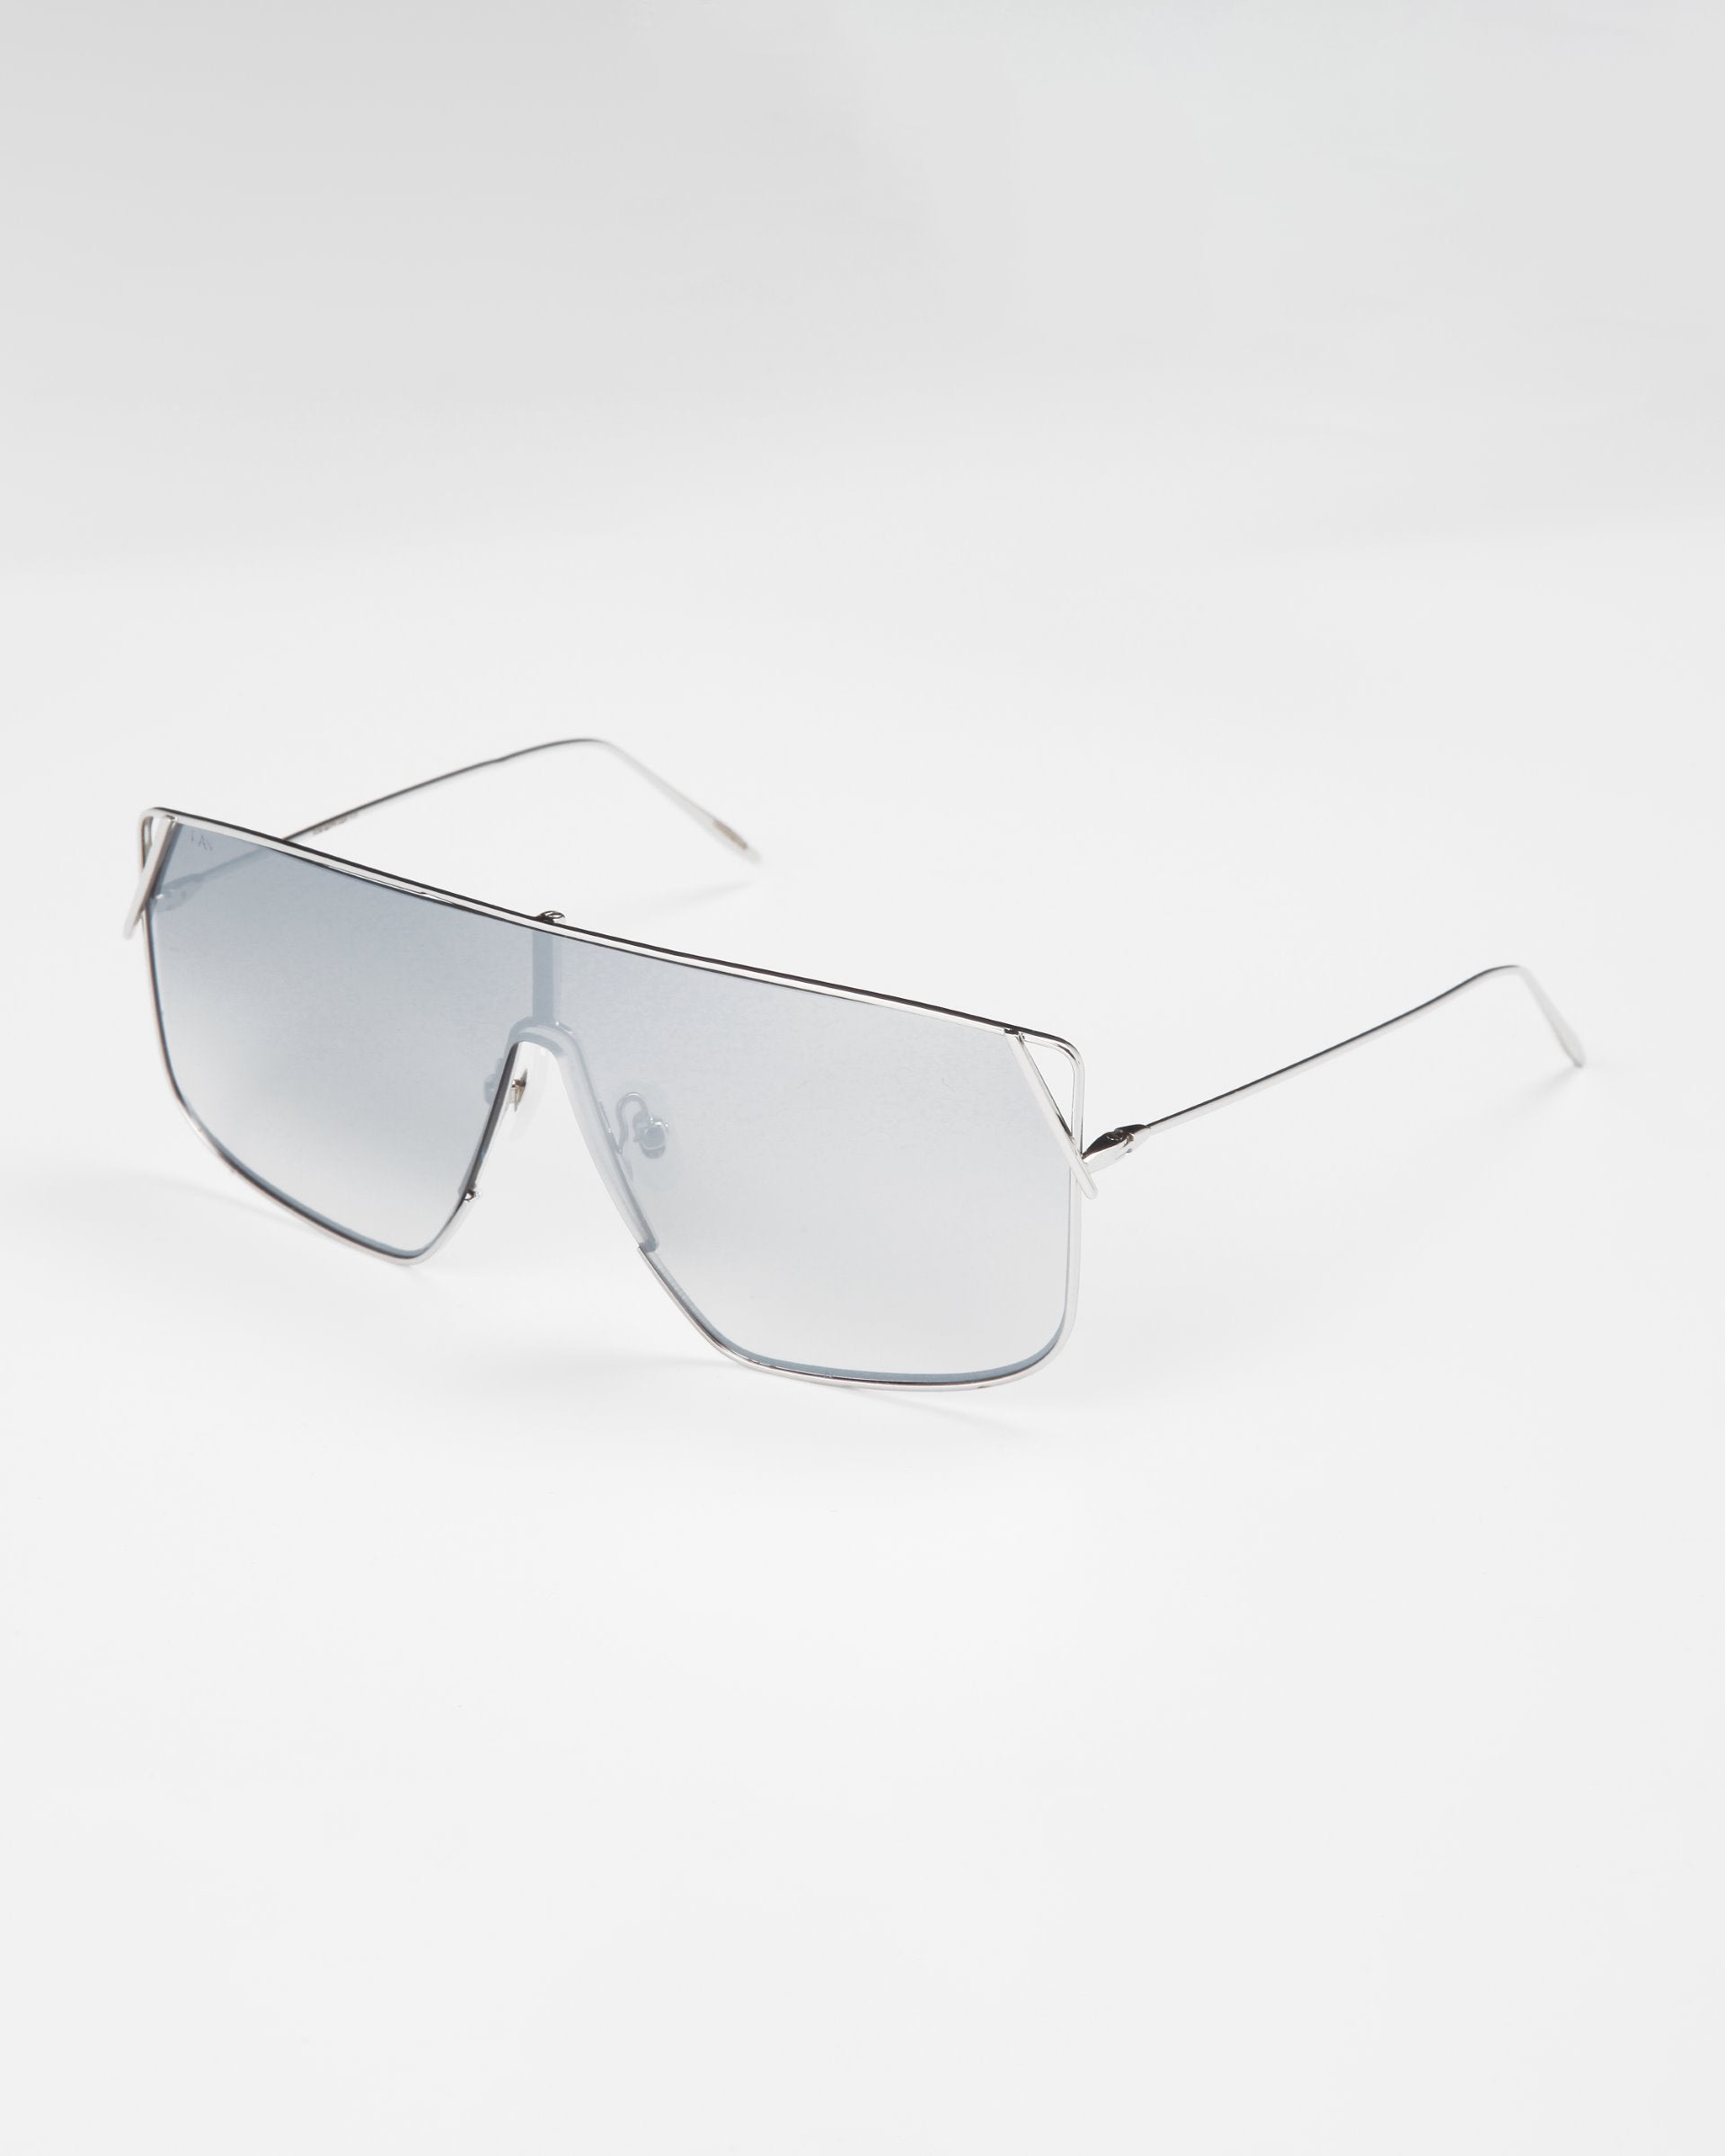 A pair of Horizon sunglasses by For Art's Sake® with silver-tinted lenses and thin stainless steel frames. The rectangular lenses feature a slight angular cut near the nose bridge, giving them a sleek and stylish appearance. Complete with adjustable nosepads and full UVA & UVB protection. The background is plain white.